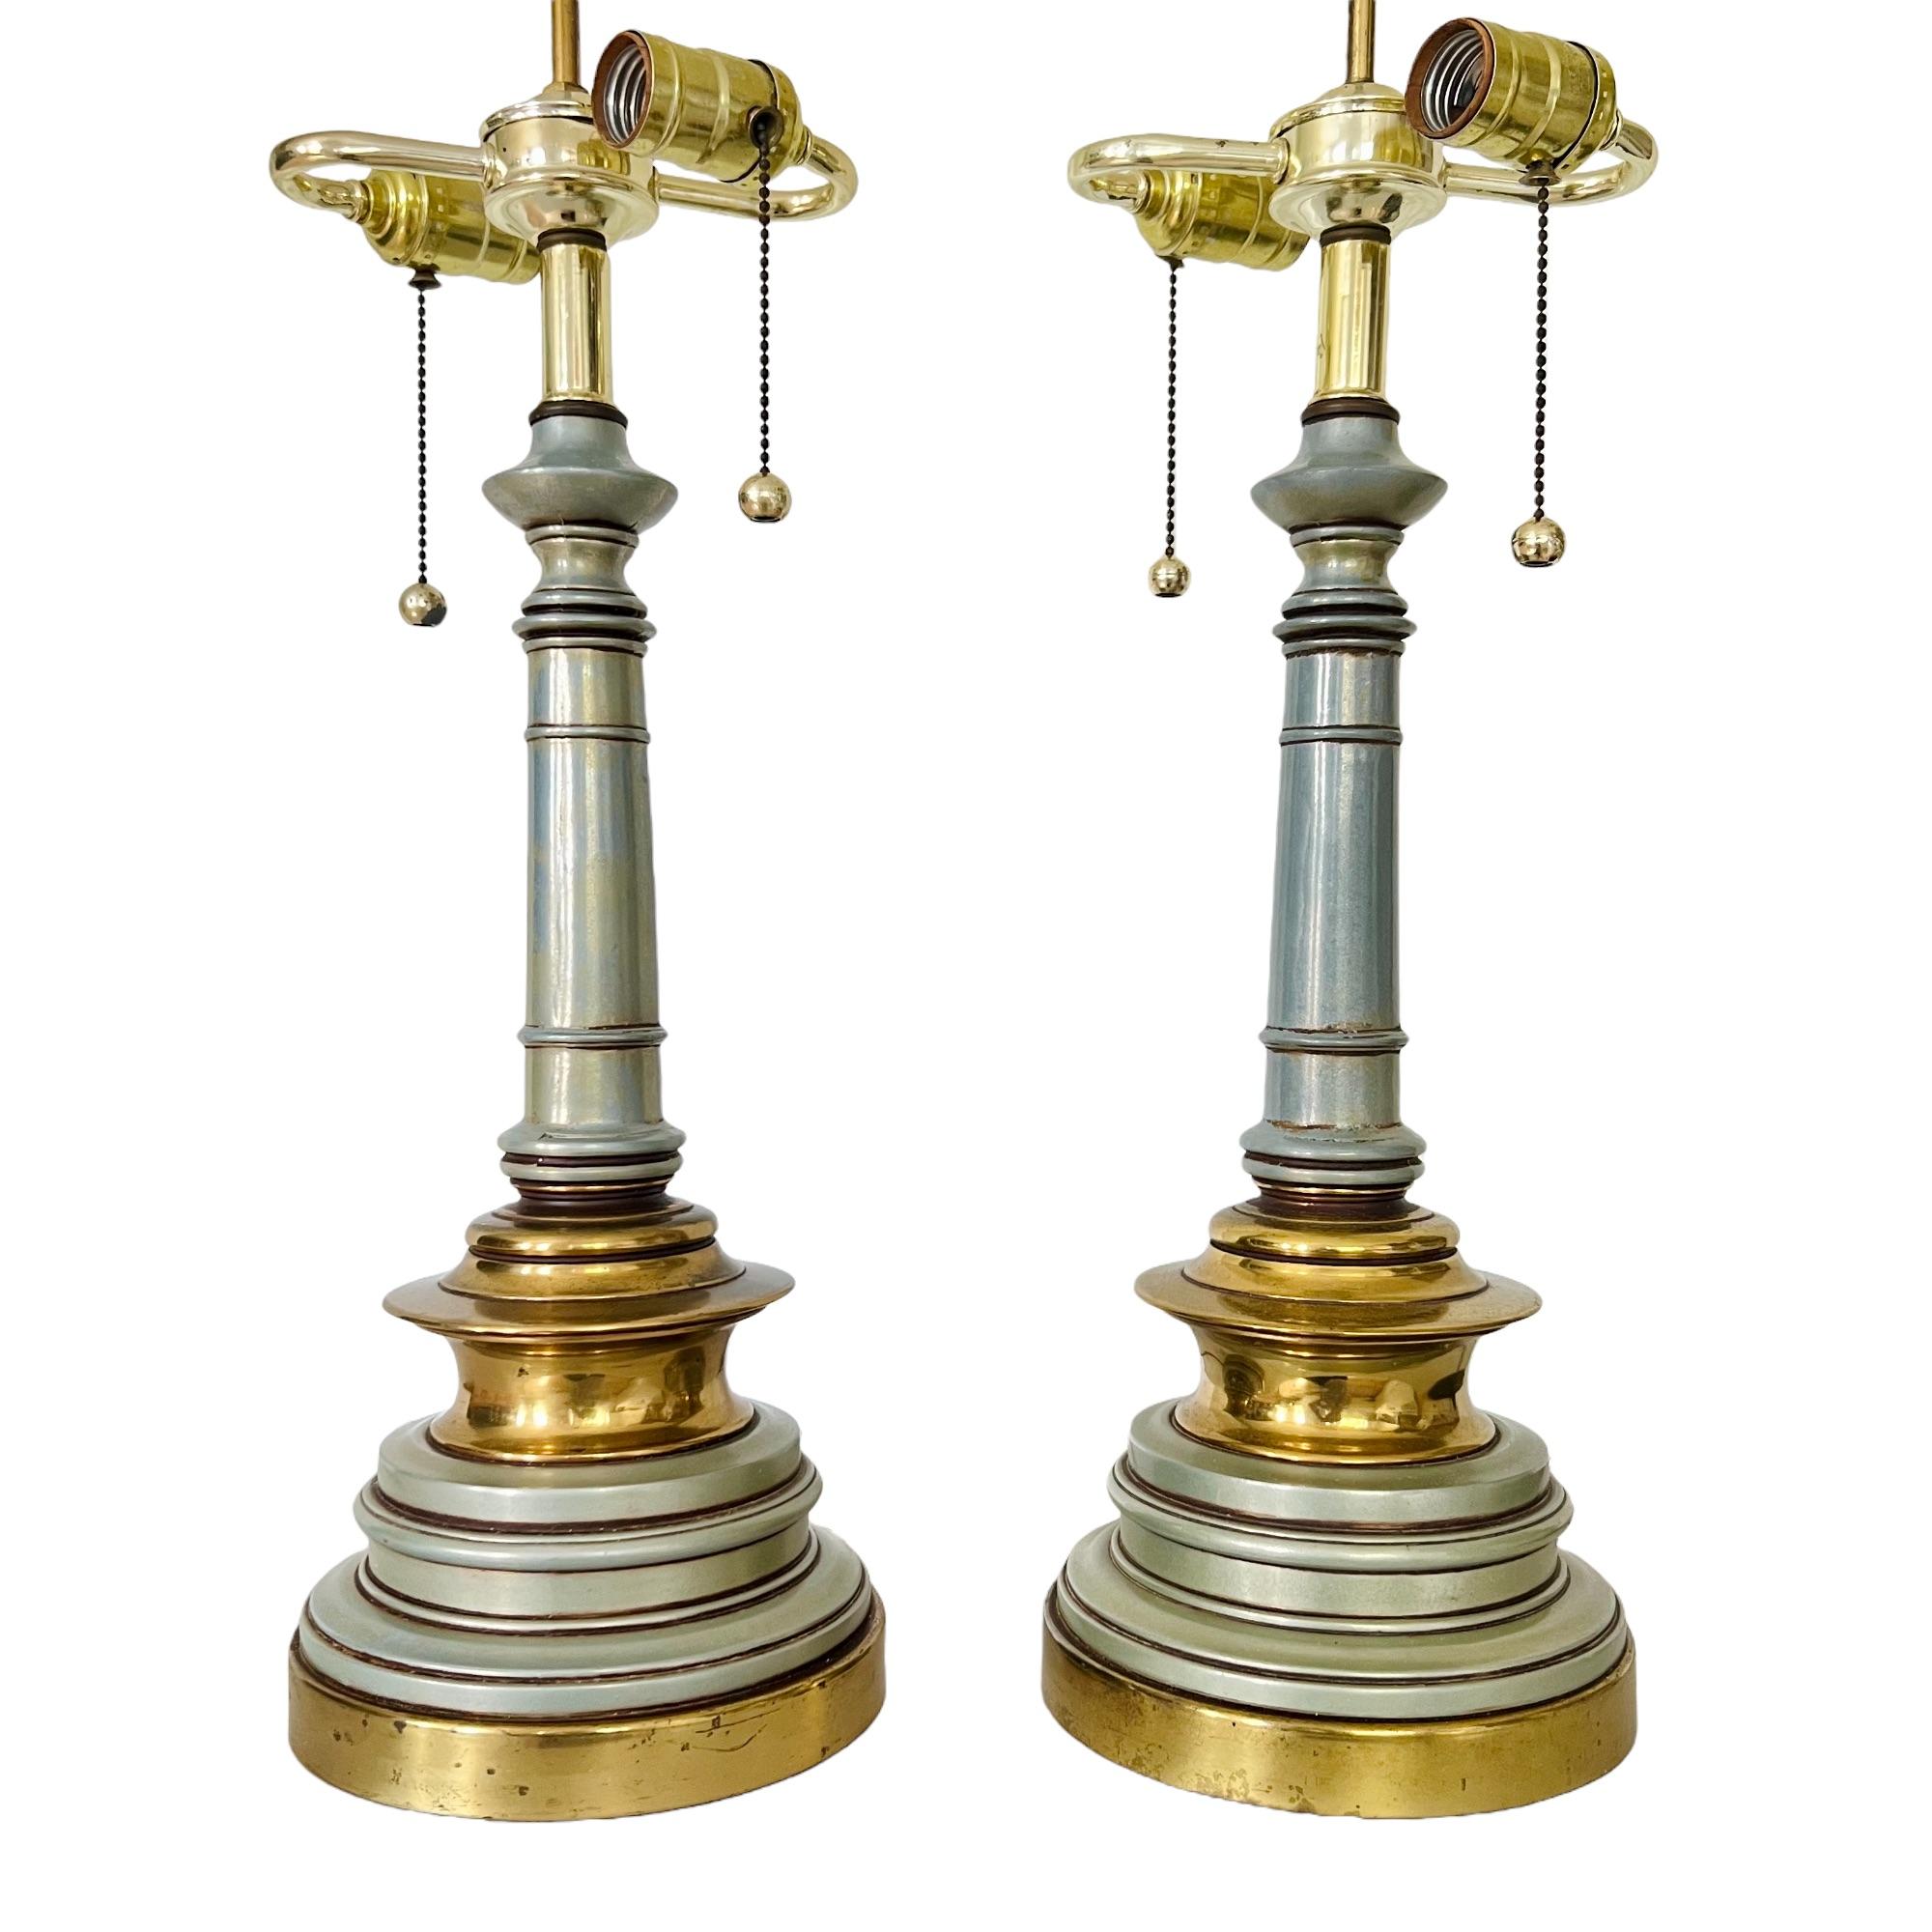 Hollywood Regency Enamel & Brass Lamps with Yellow Shades, a Pair 1